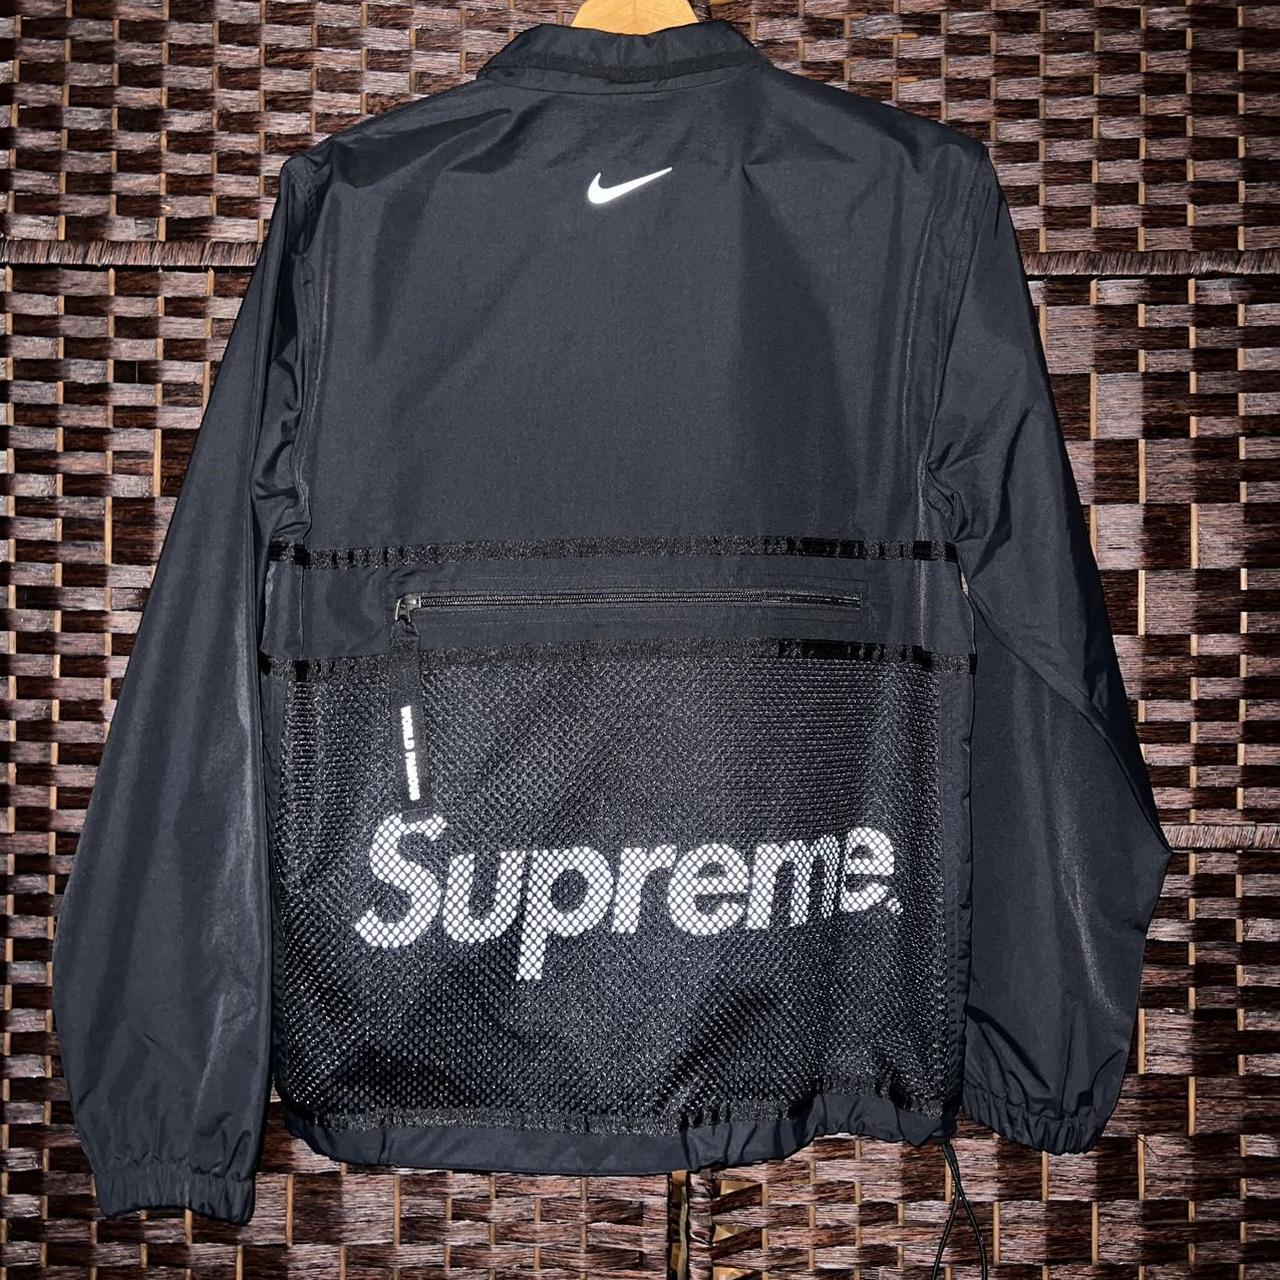 Supreme Nike Trail Running Jacket in black. From...